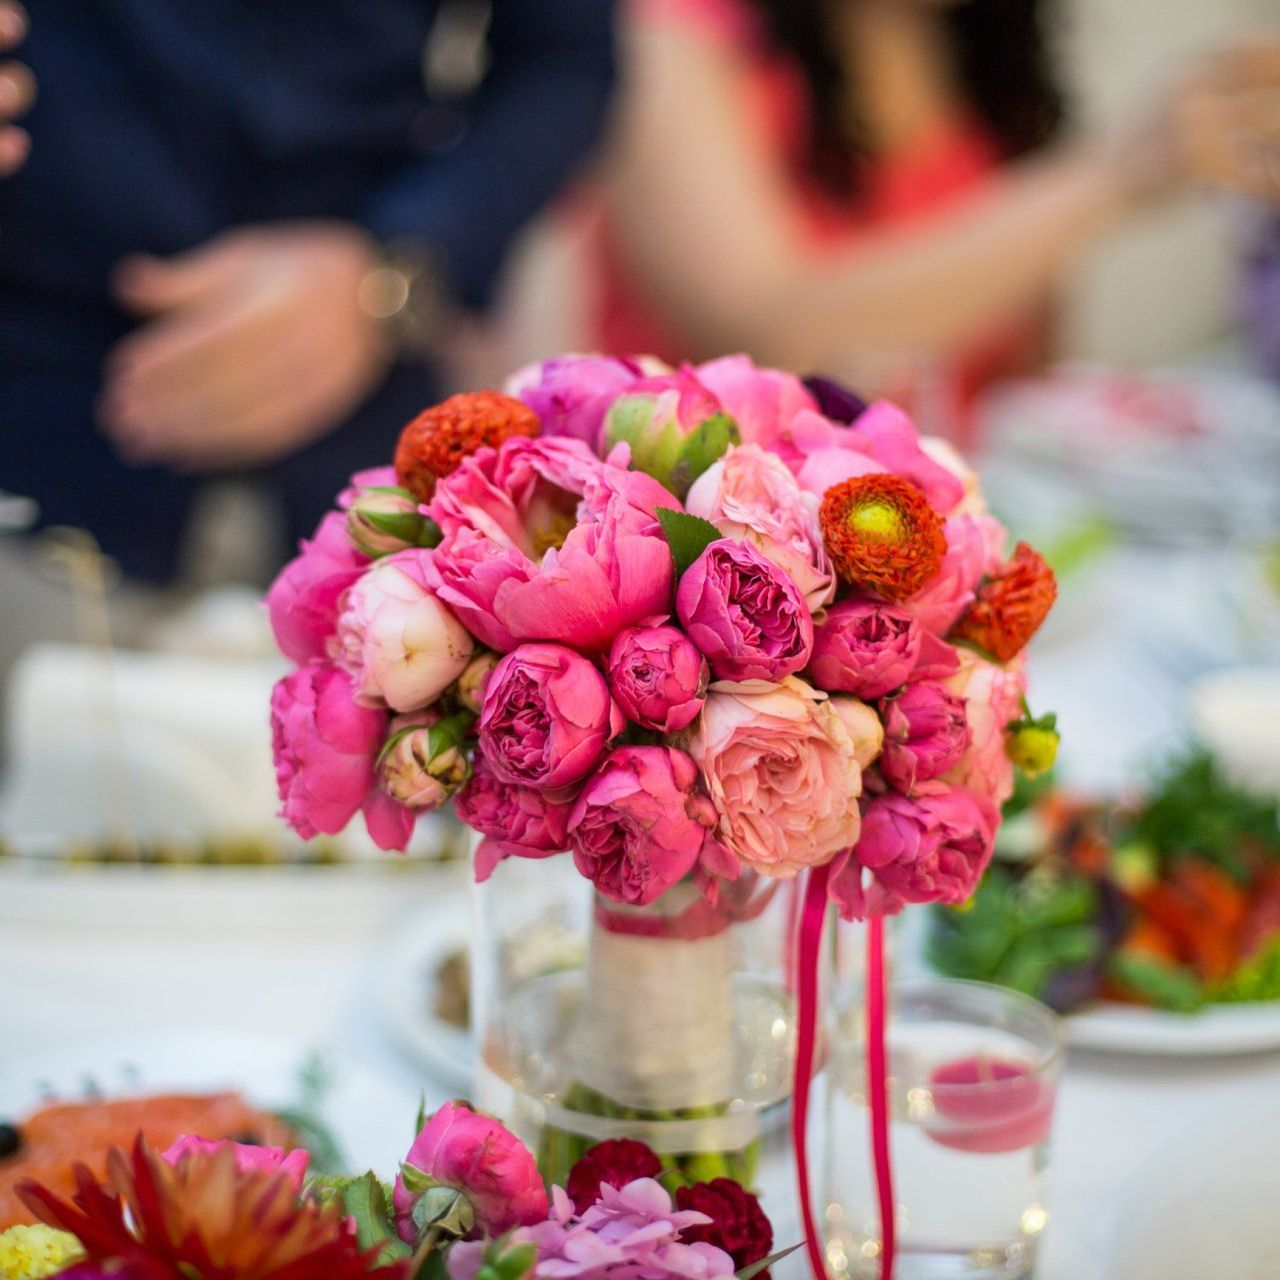 a bouquet of pink flowers in a vase on a table